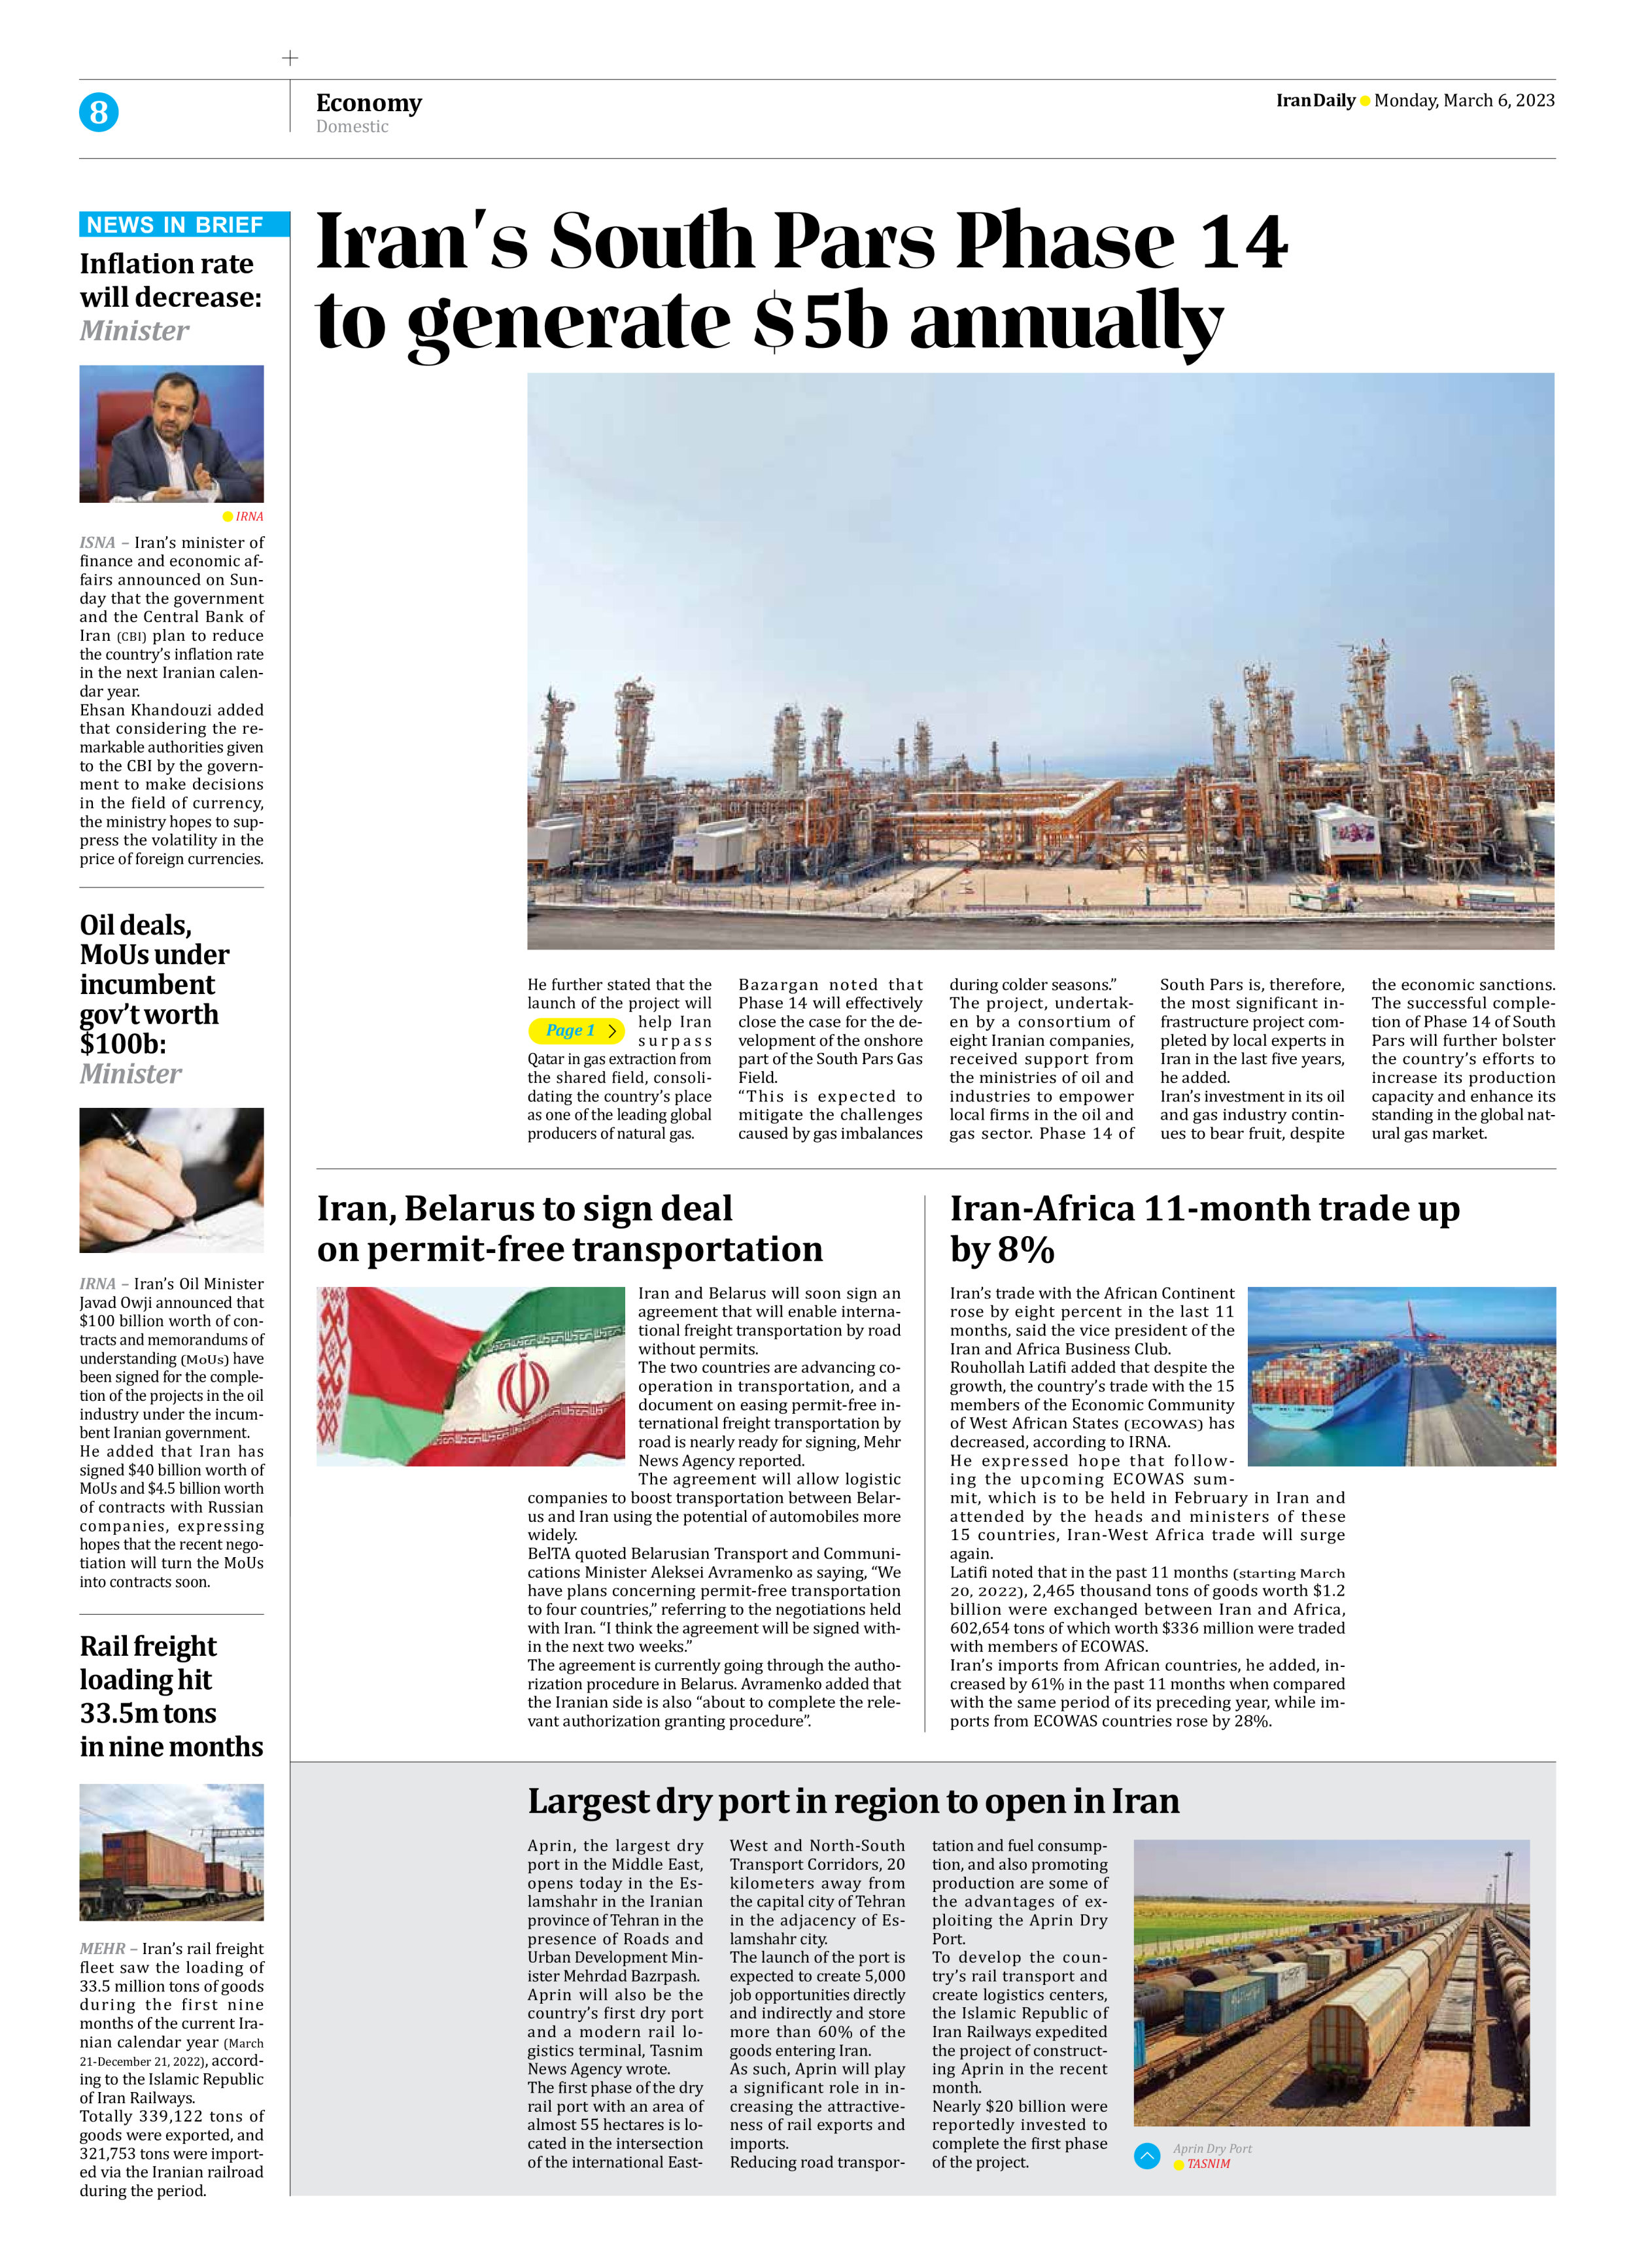 Iran Daily - Number Seven Thousand Two Hundred and Fifty Two - 06 March 2023 - Page 8